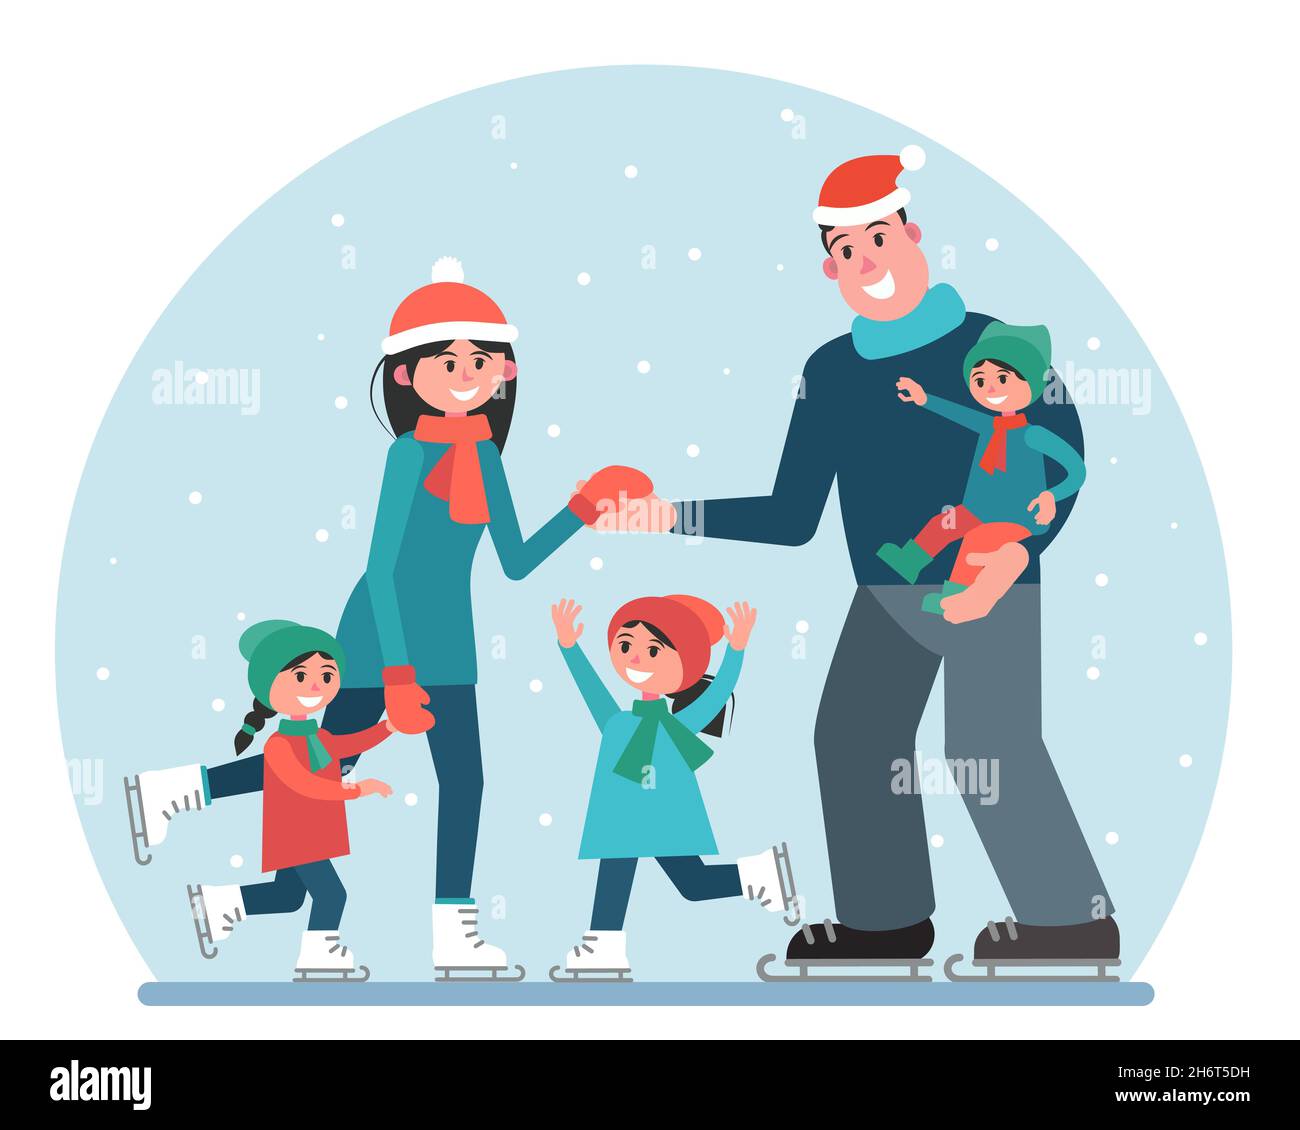 Big family at the rink. Parents and children ice skating in the snow. Leisure. Vector illustration in a flat style. Stock Vector